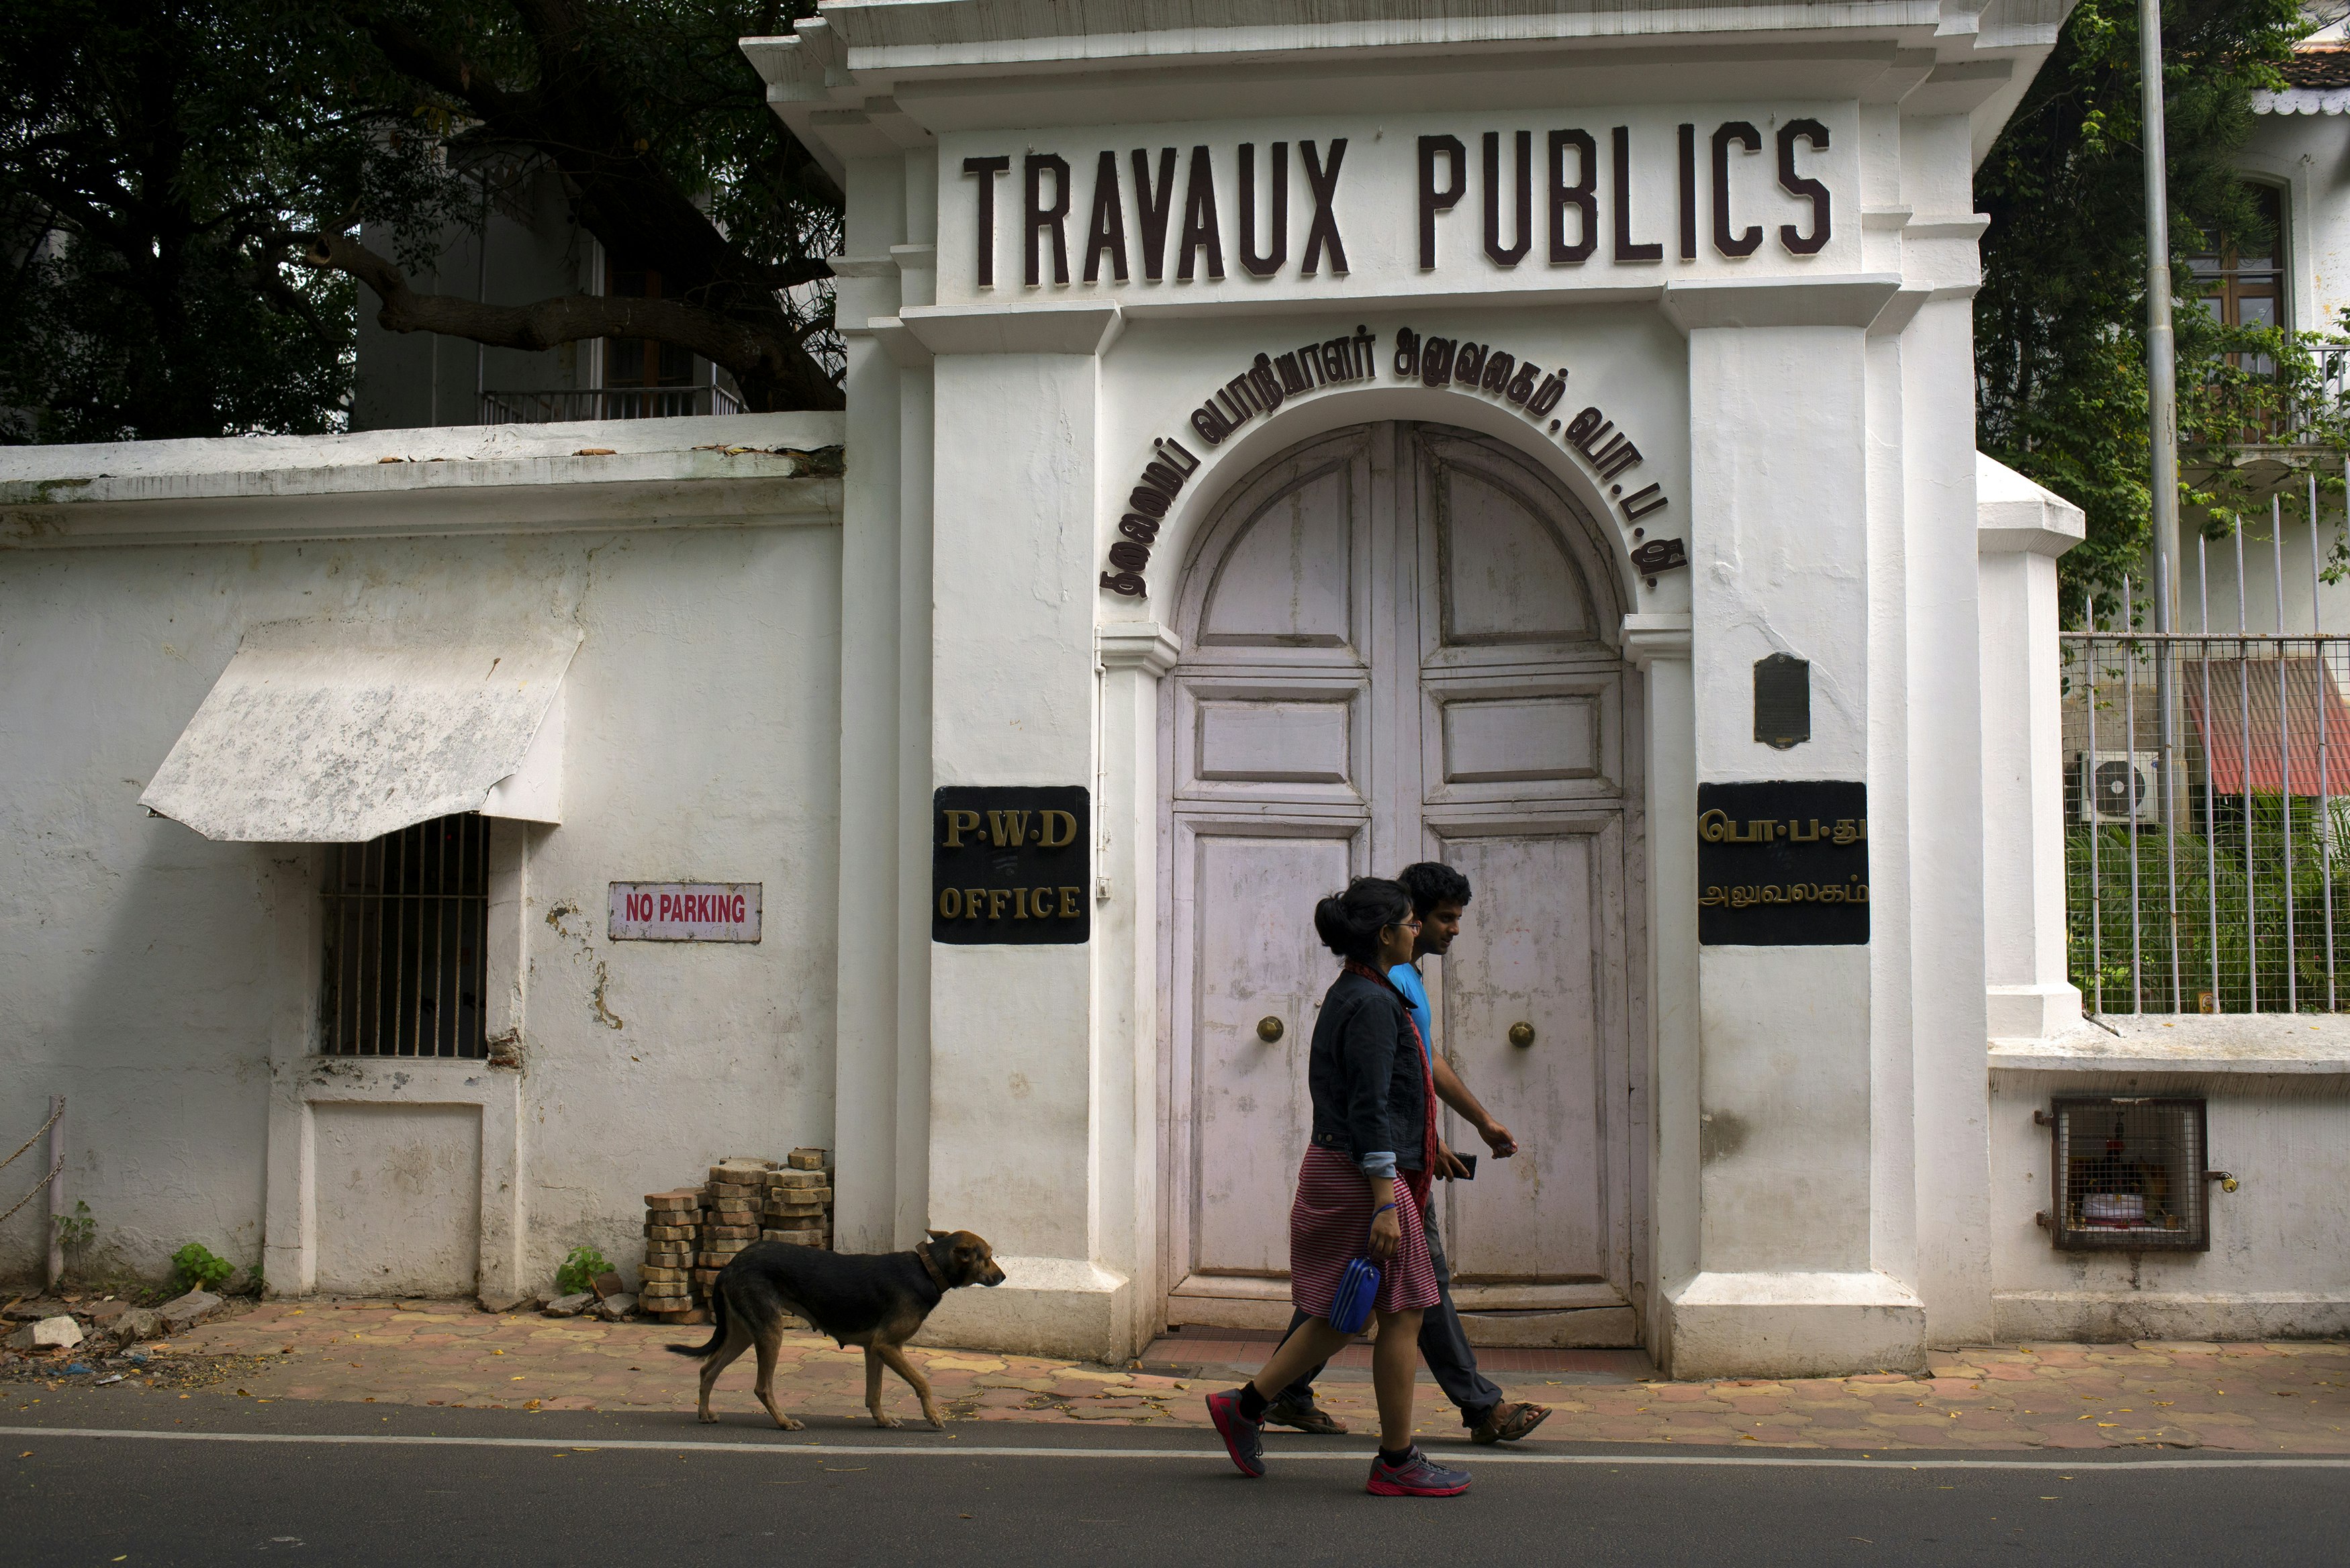 A young Indian couple in modern dress, followed by a dog, walk in front of the white colonial-style Travaux Publics government building